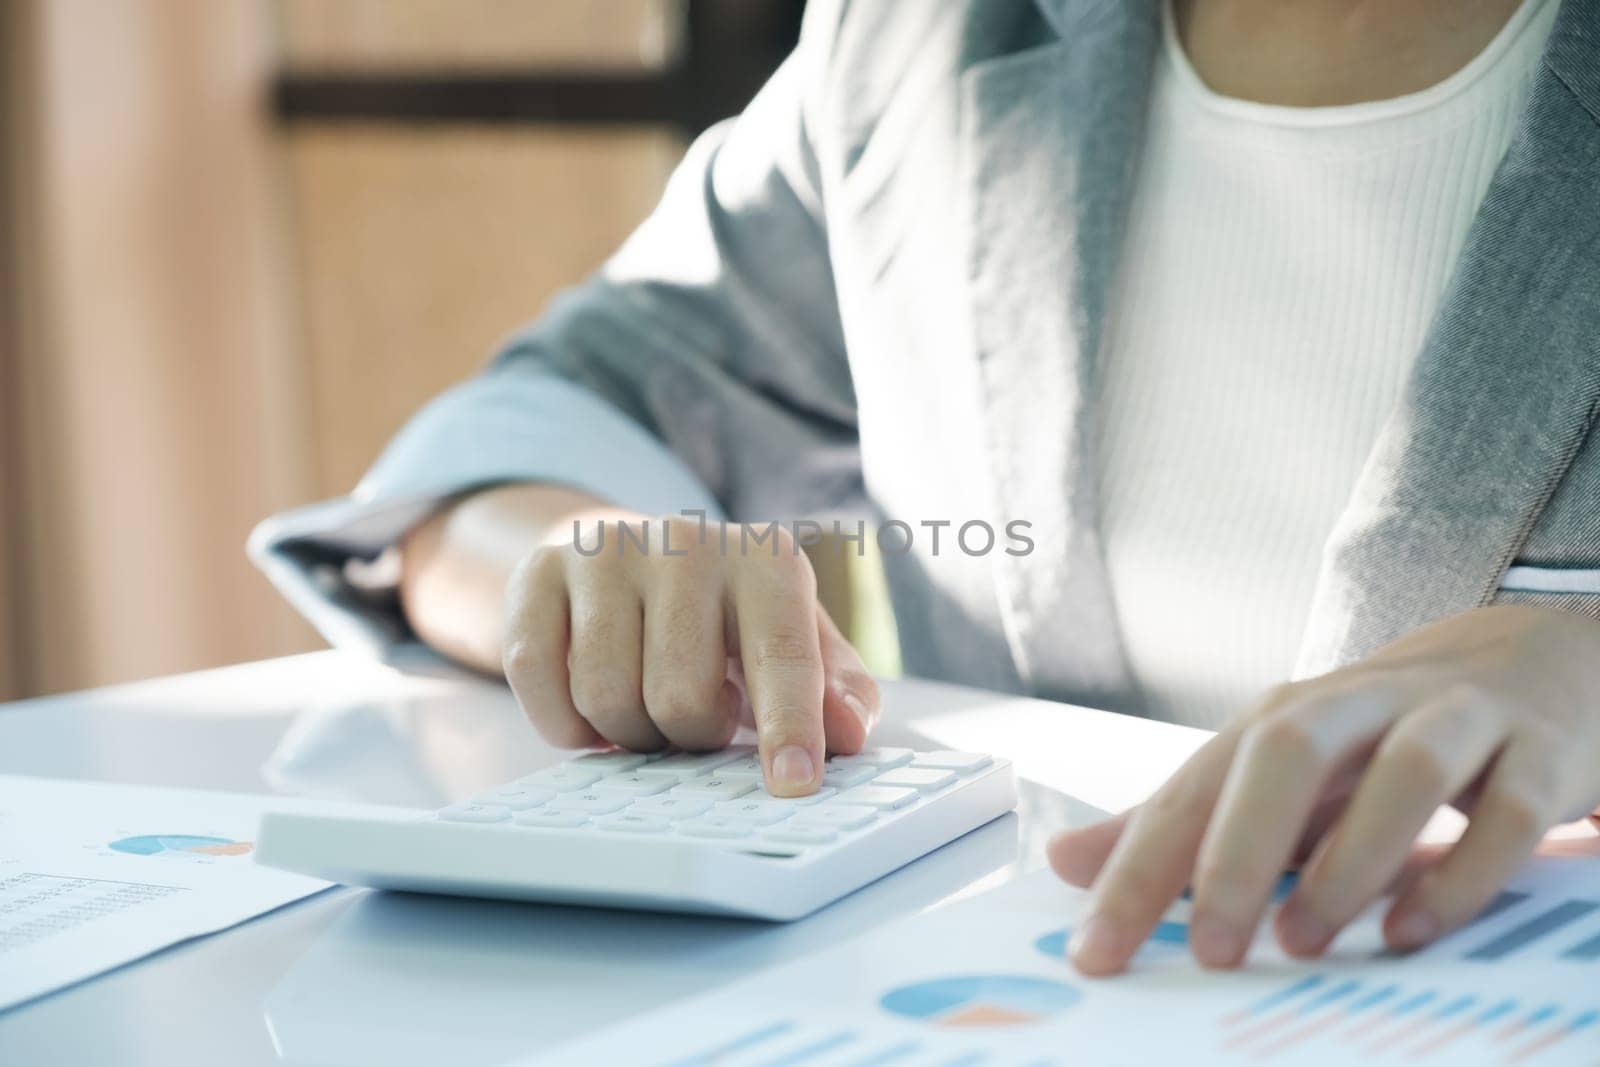 A woman is sitting at a desk with a calculator and a stack of papers. She is focused on her work, possibly working on financial or business-related tasks. Concept of concentration and productivity